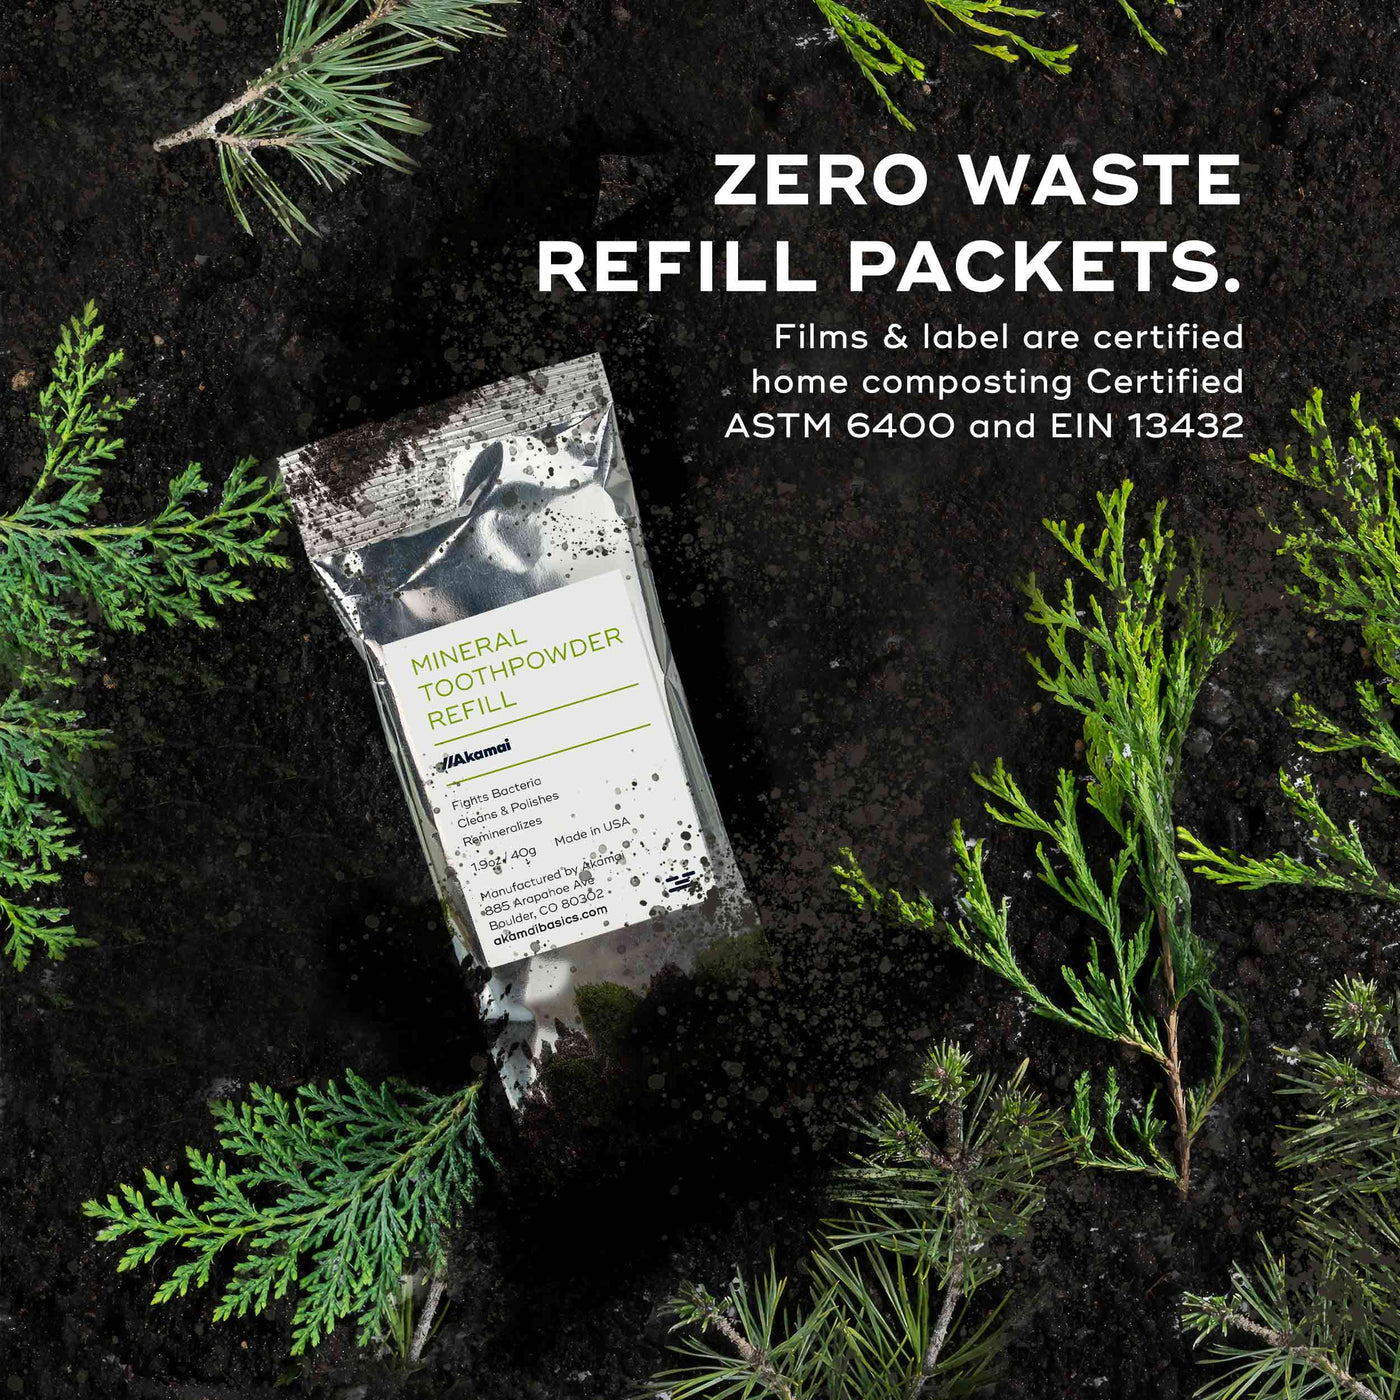 Akamai Mineral Toothpowder's refillable options includes zero waste compostable refill packets.